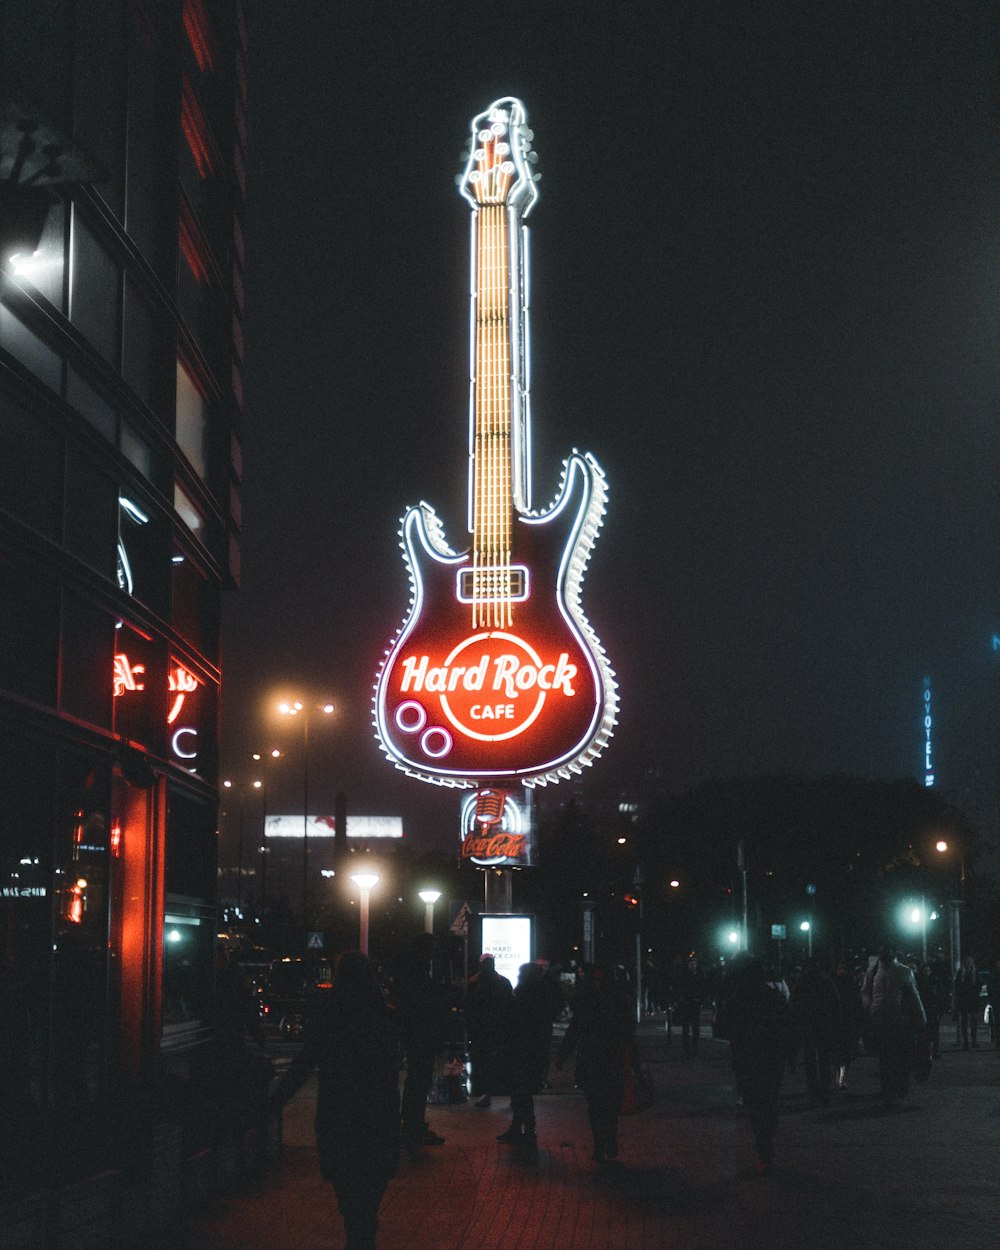 a guitar sign is lit up in the dark